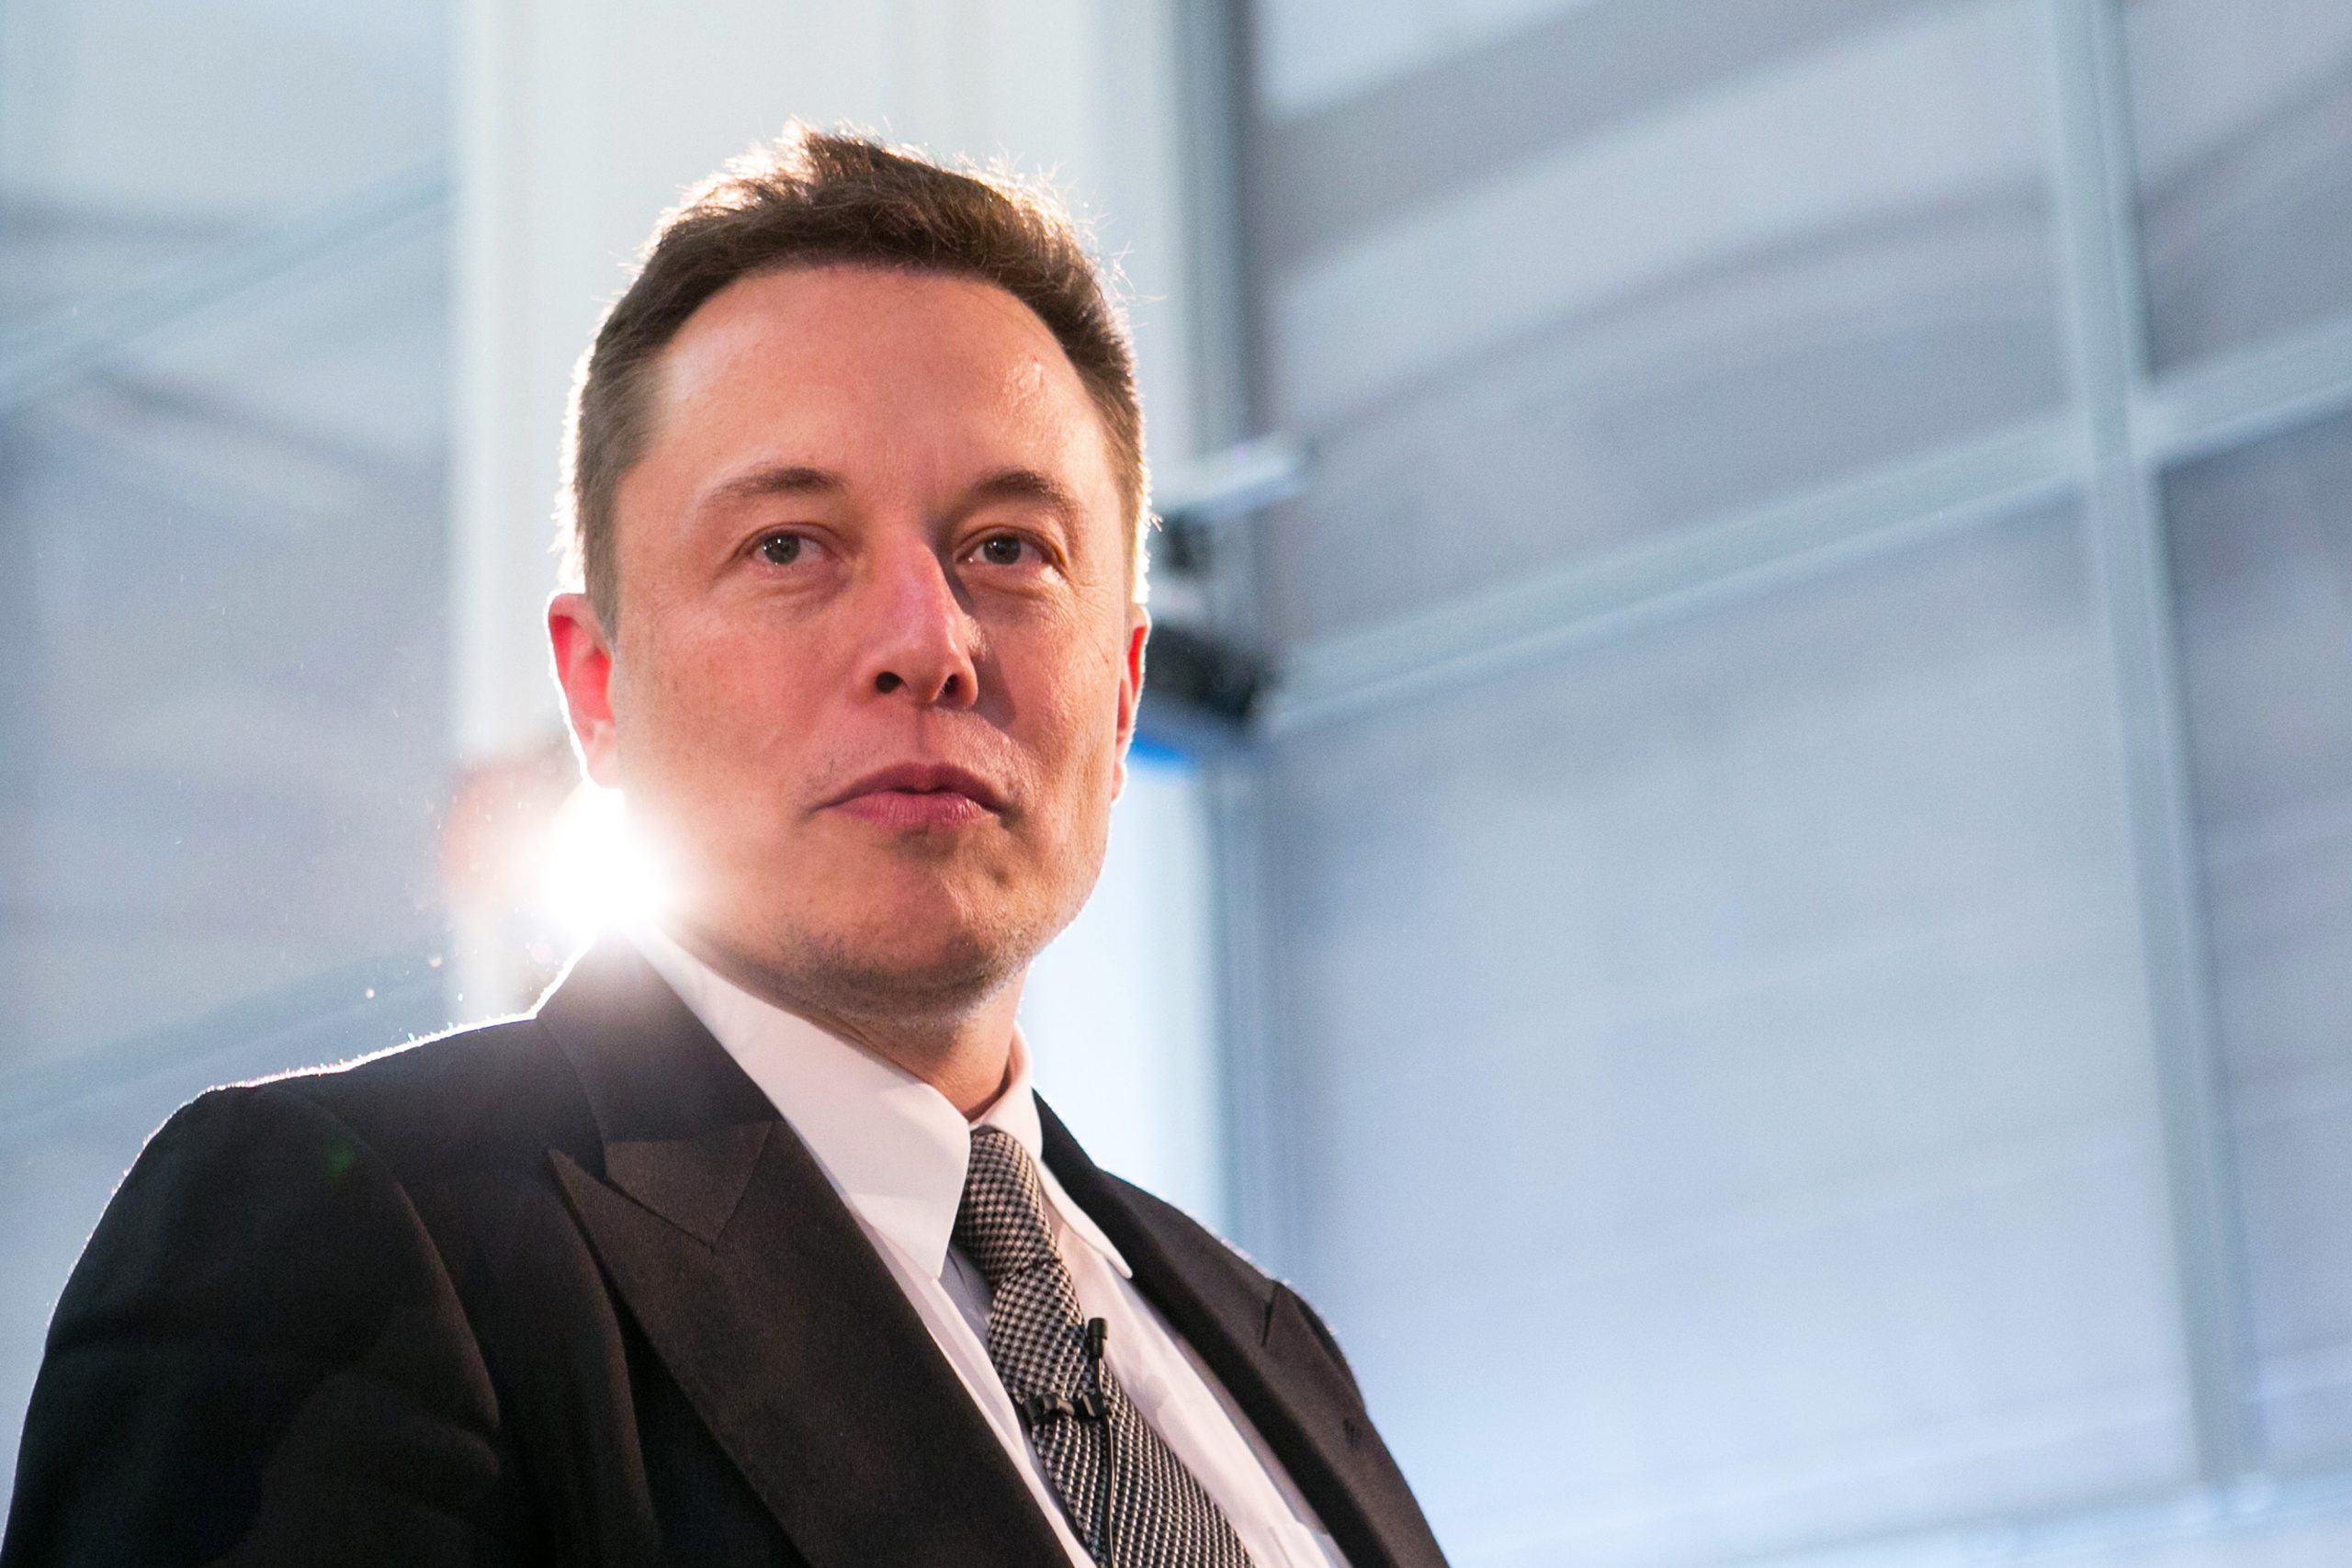 Germany’s Economy And Energy Minister Sigmar Gabriel Meets Tesla Motors Inc. Chief Executive Officer Elon Musk